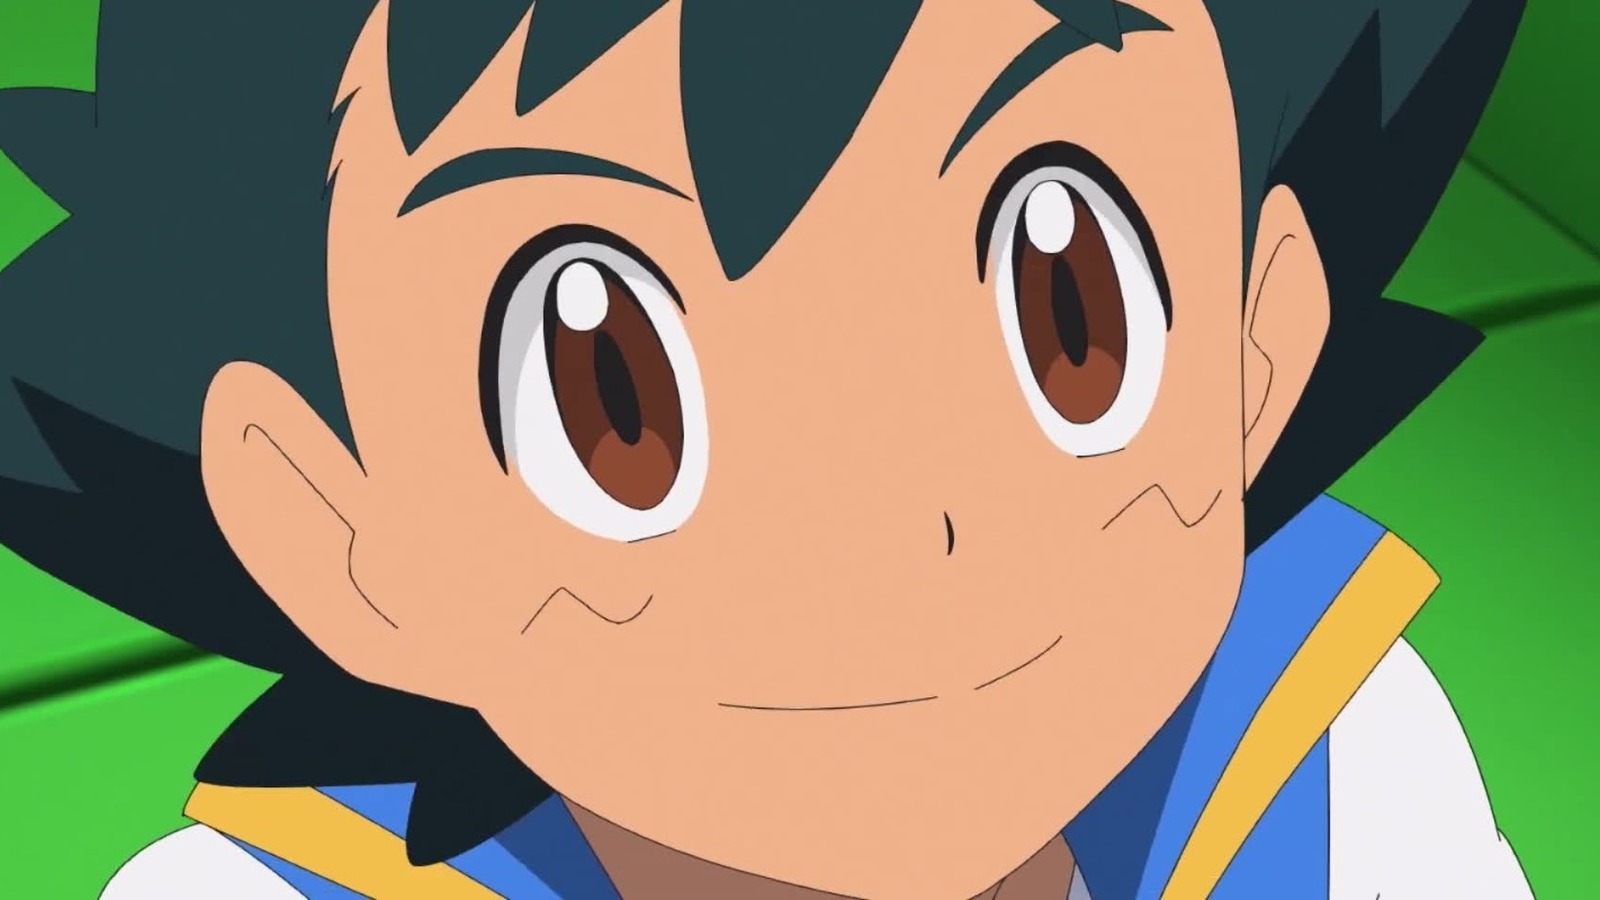 Ash and Pikachu Are Ending Their Journey in the Pokemon Anime with